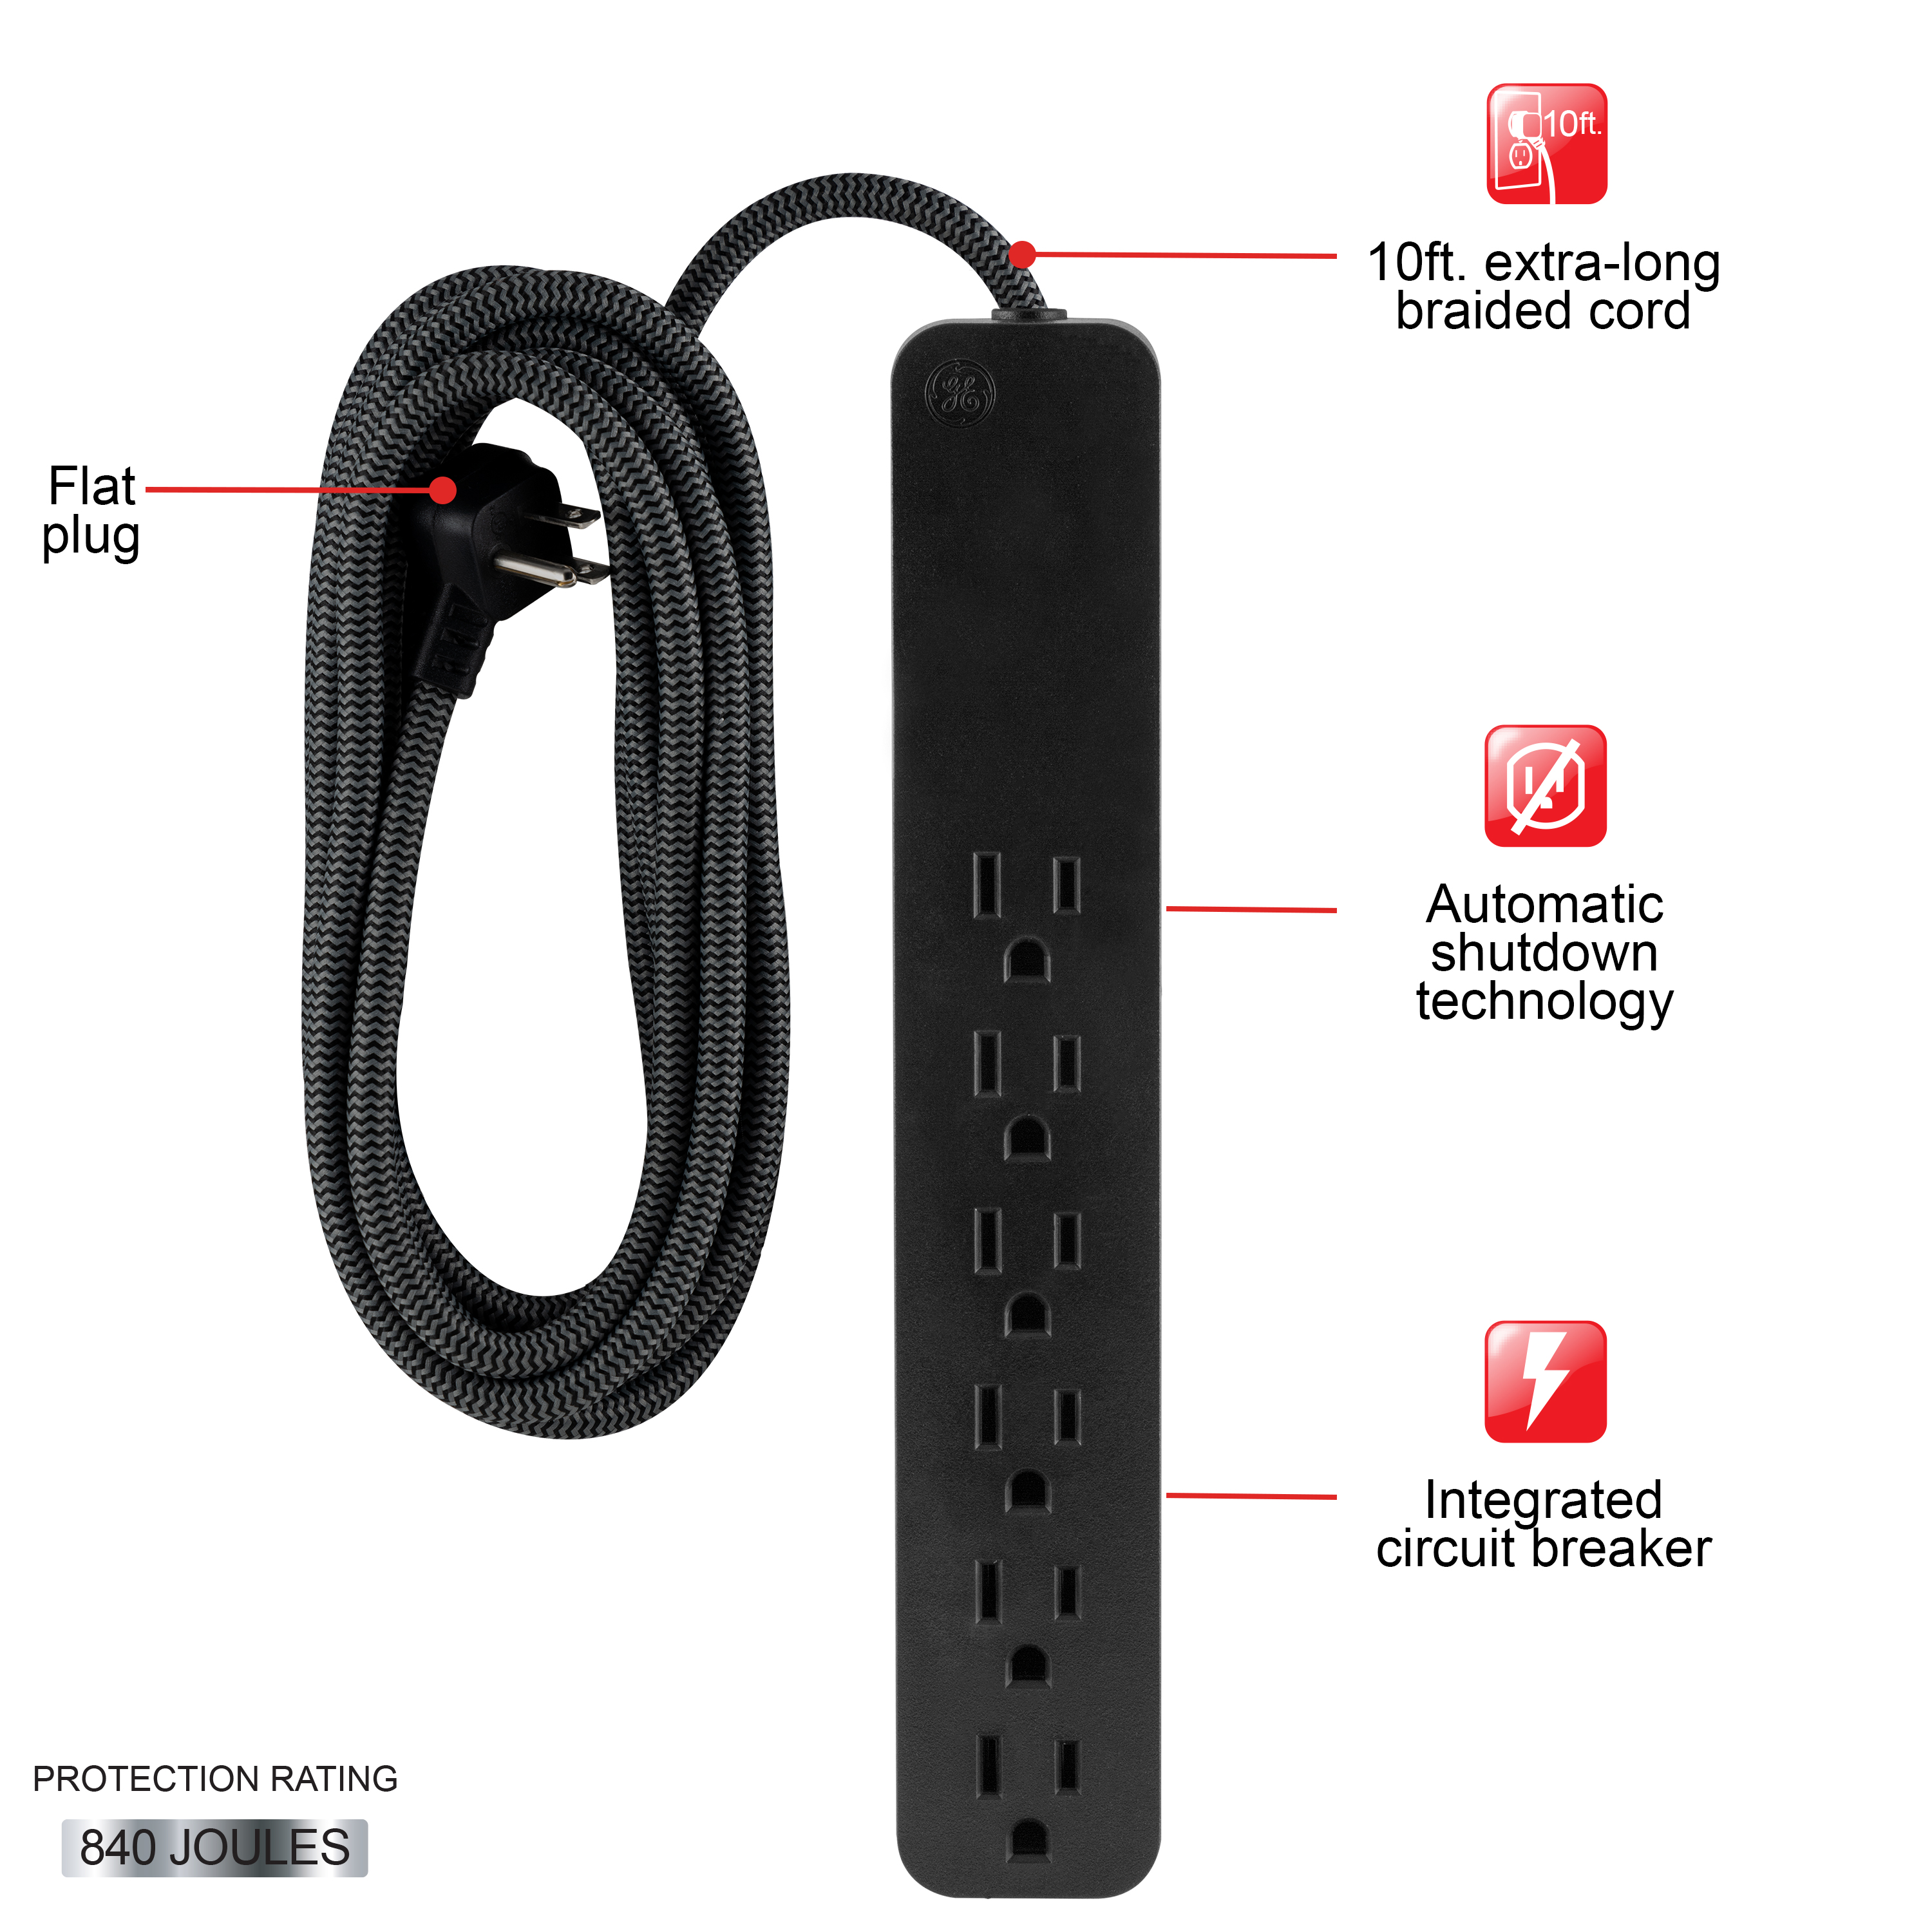 GE 6-Grounded Outlet Surge Protector, 840J, 10ft. Braided Cord, Black – 62935 - image 2 of 7